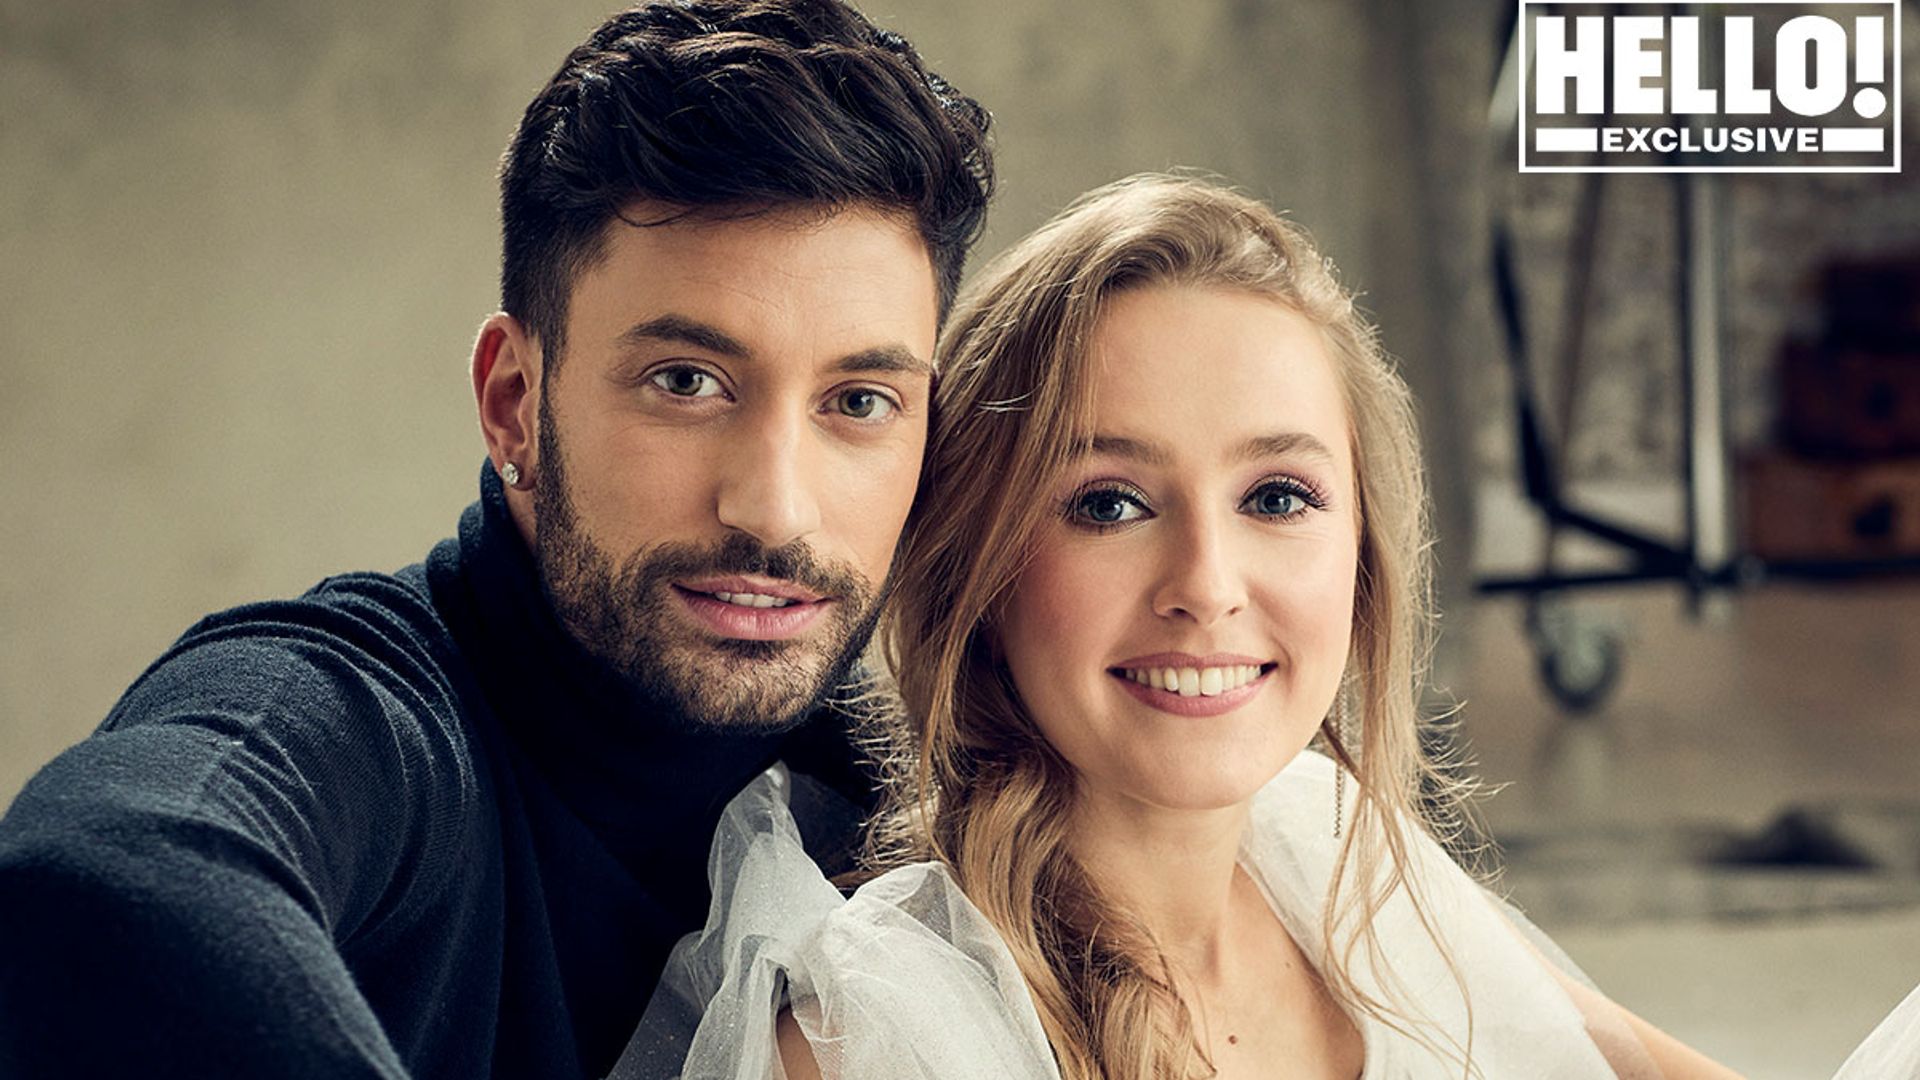 giovanni-pernice-and-rose-ayling-ellis-hello